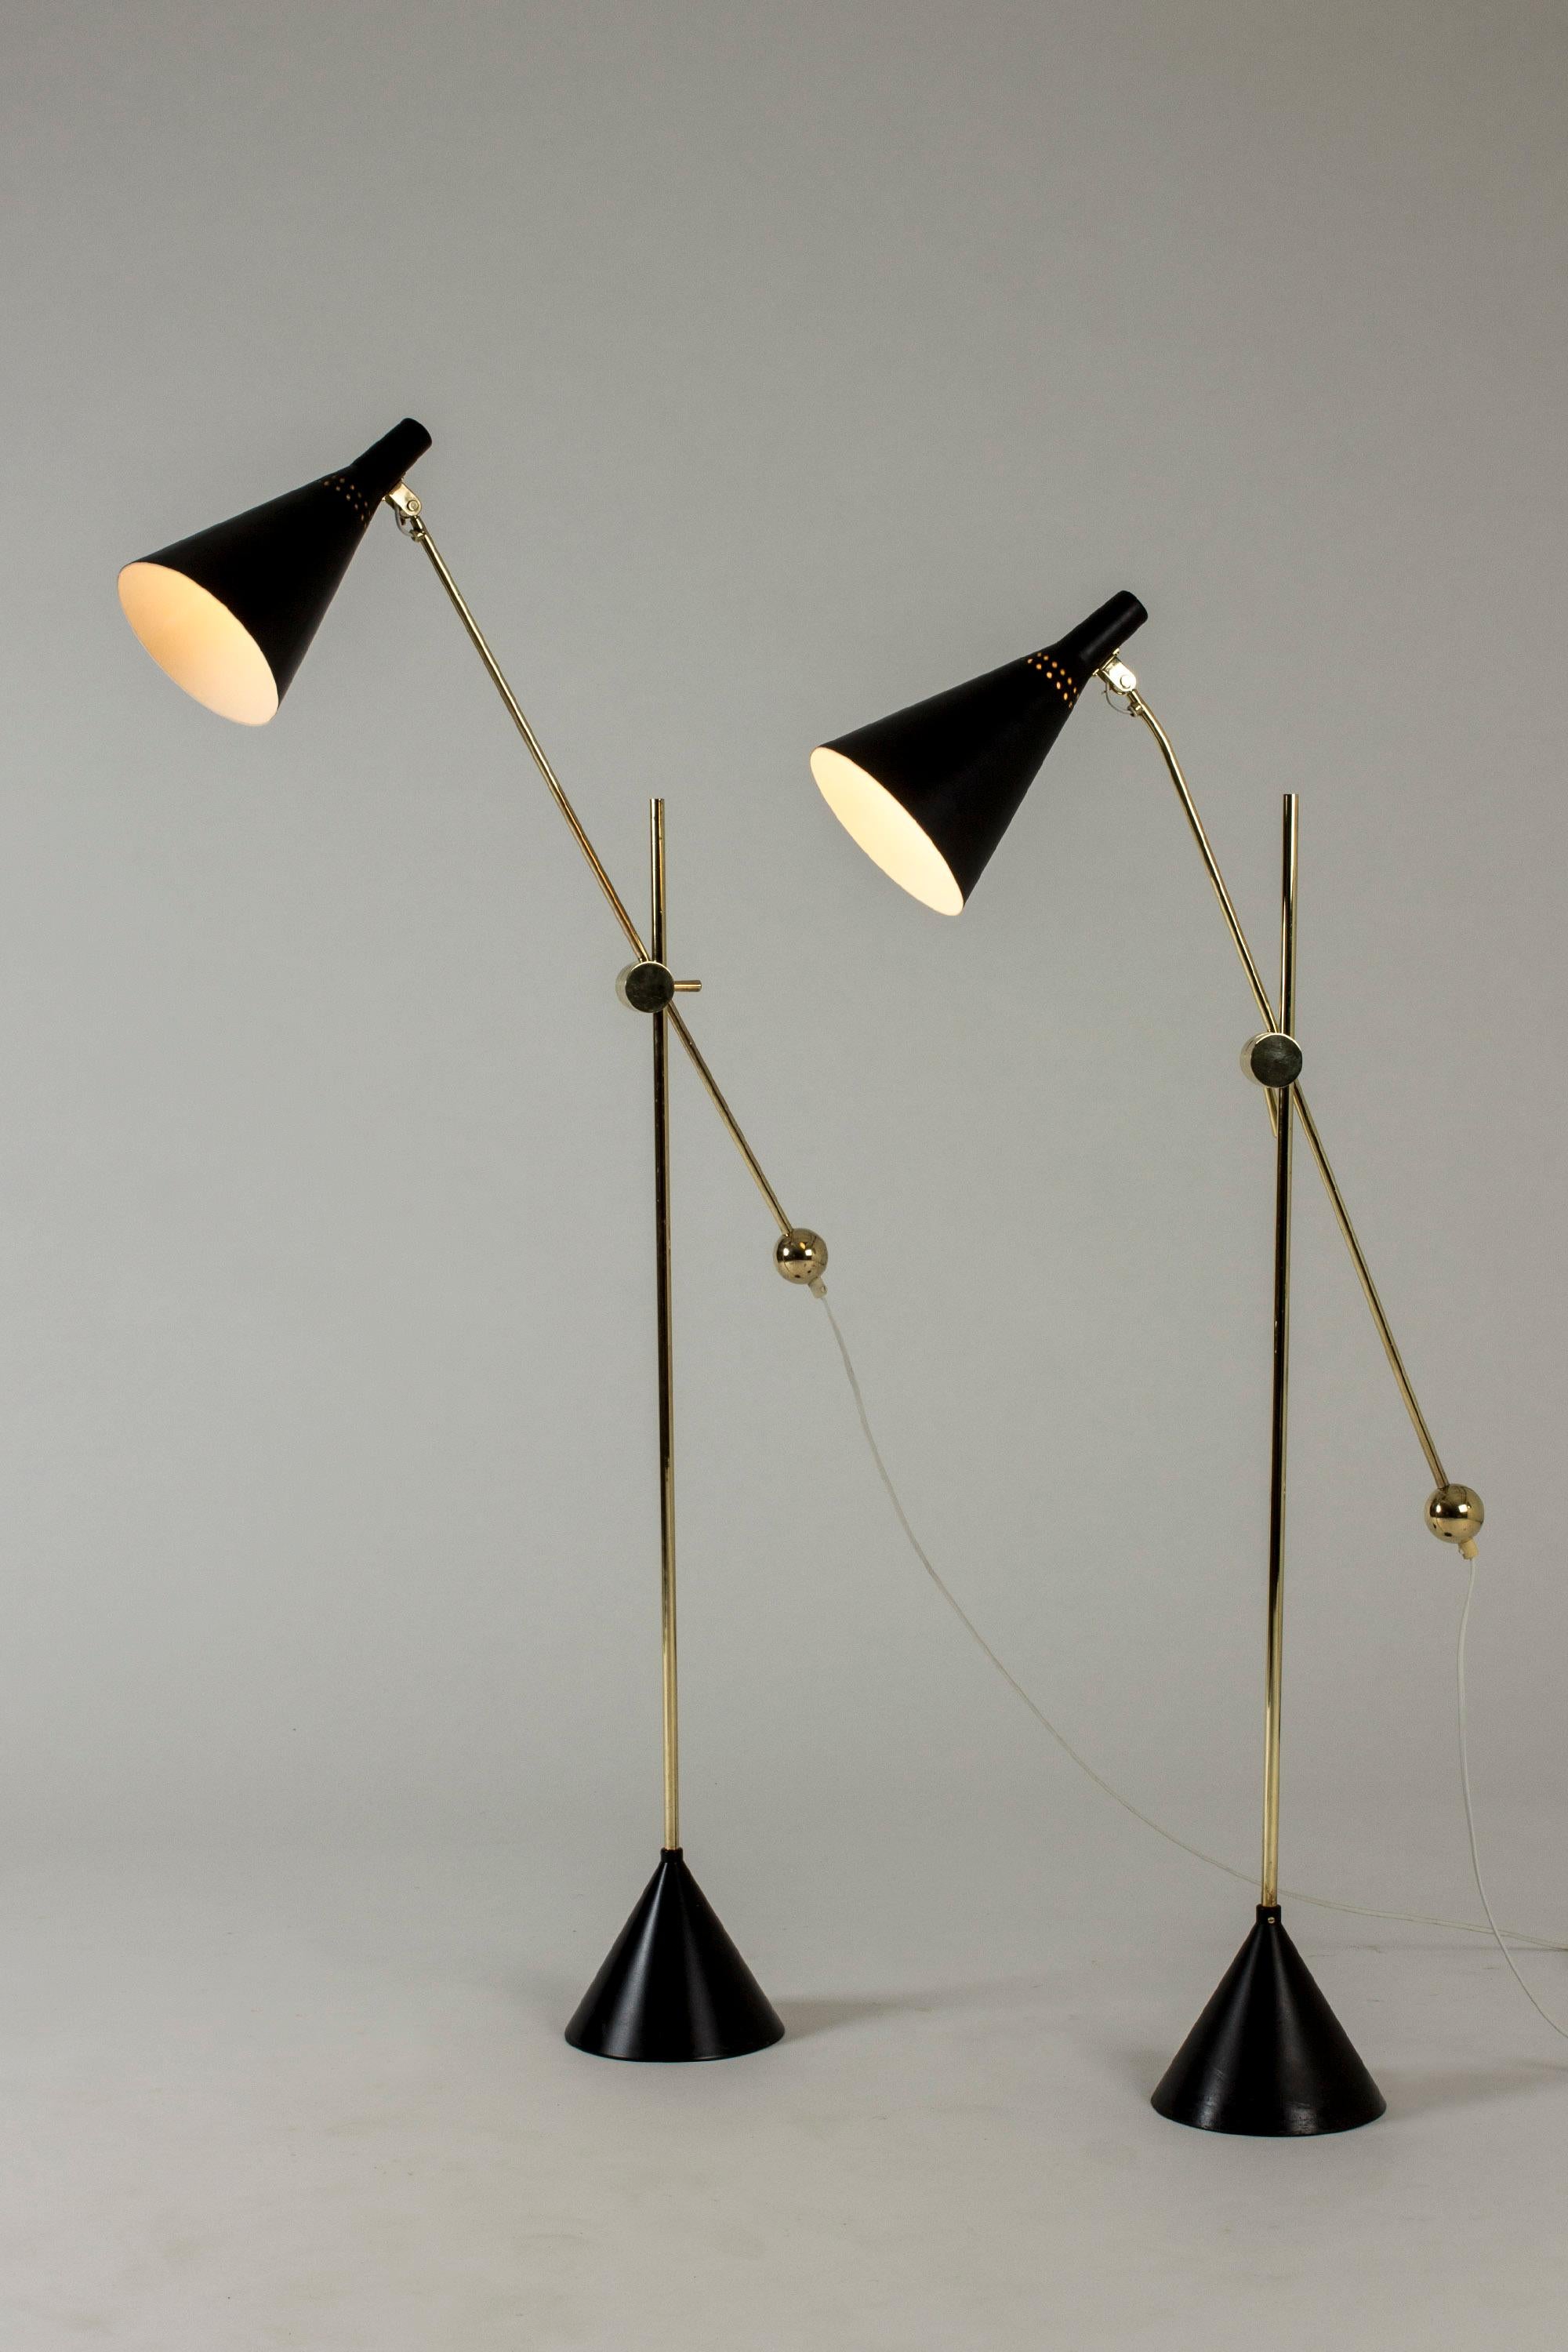 Pair of rare, amazing floor lamps by Tapio Wirkkala, made from brass and black lacquered metal. Beautiful decorative brass details and clever mechanism for shifting the height and angle of the shades. Conical bases.